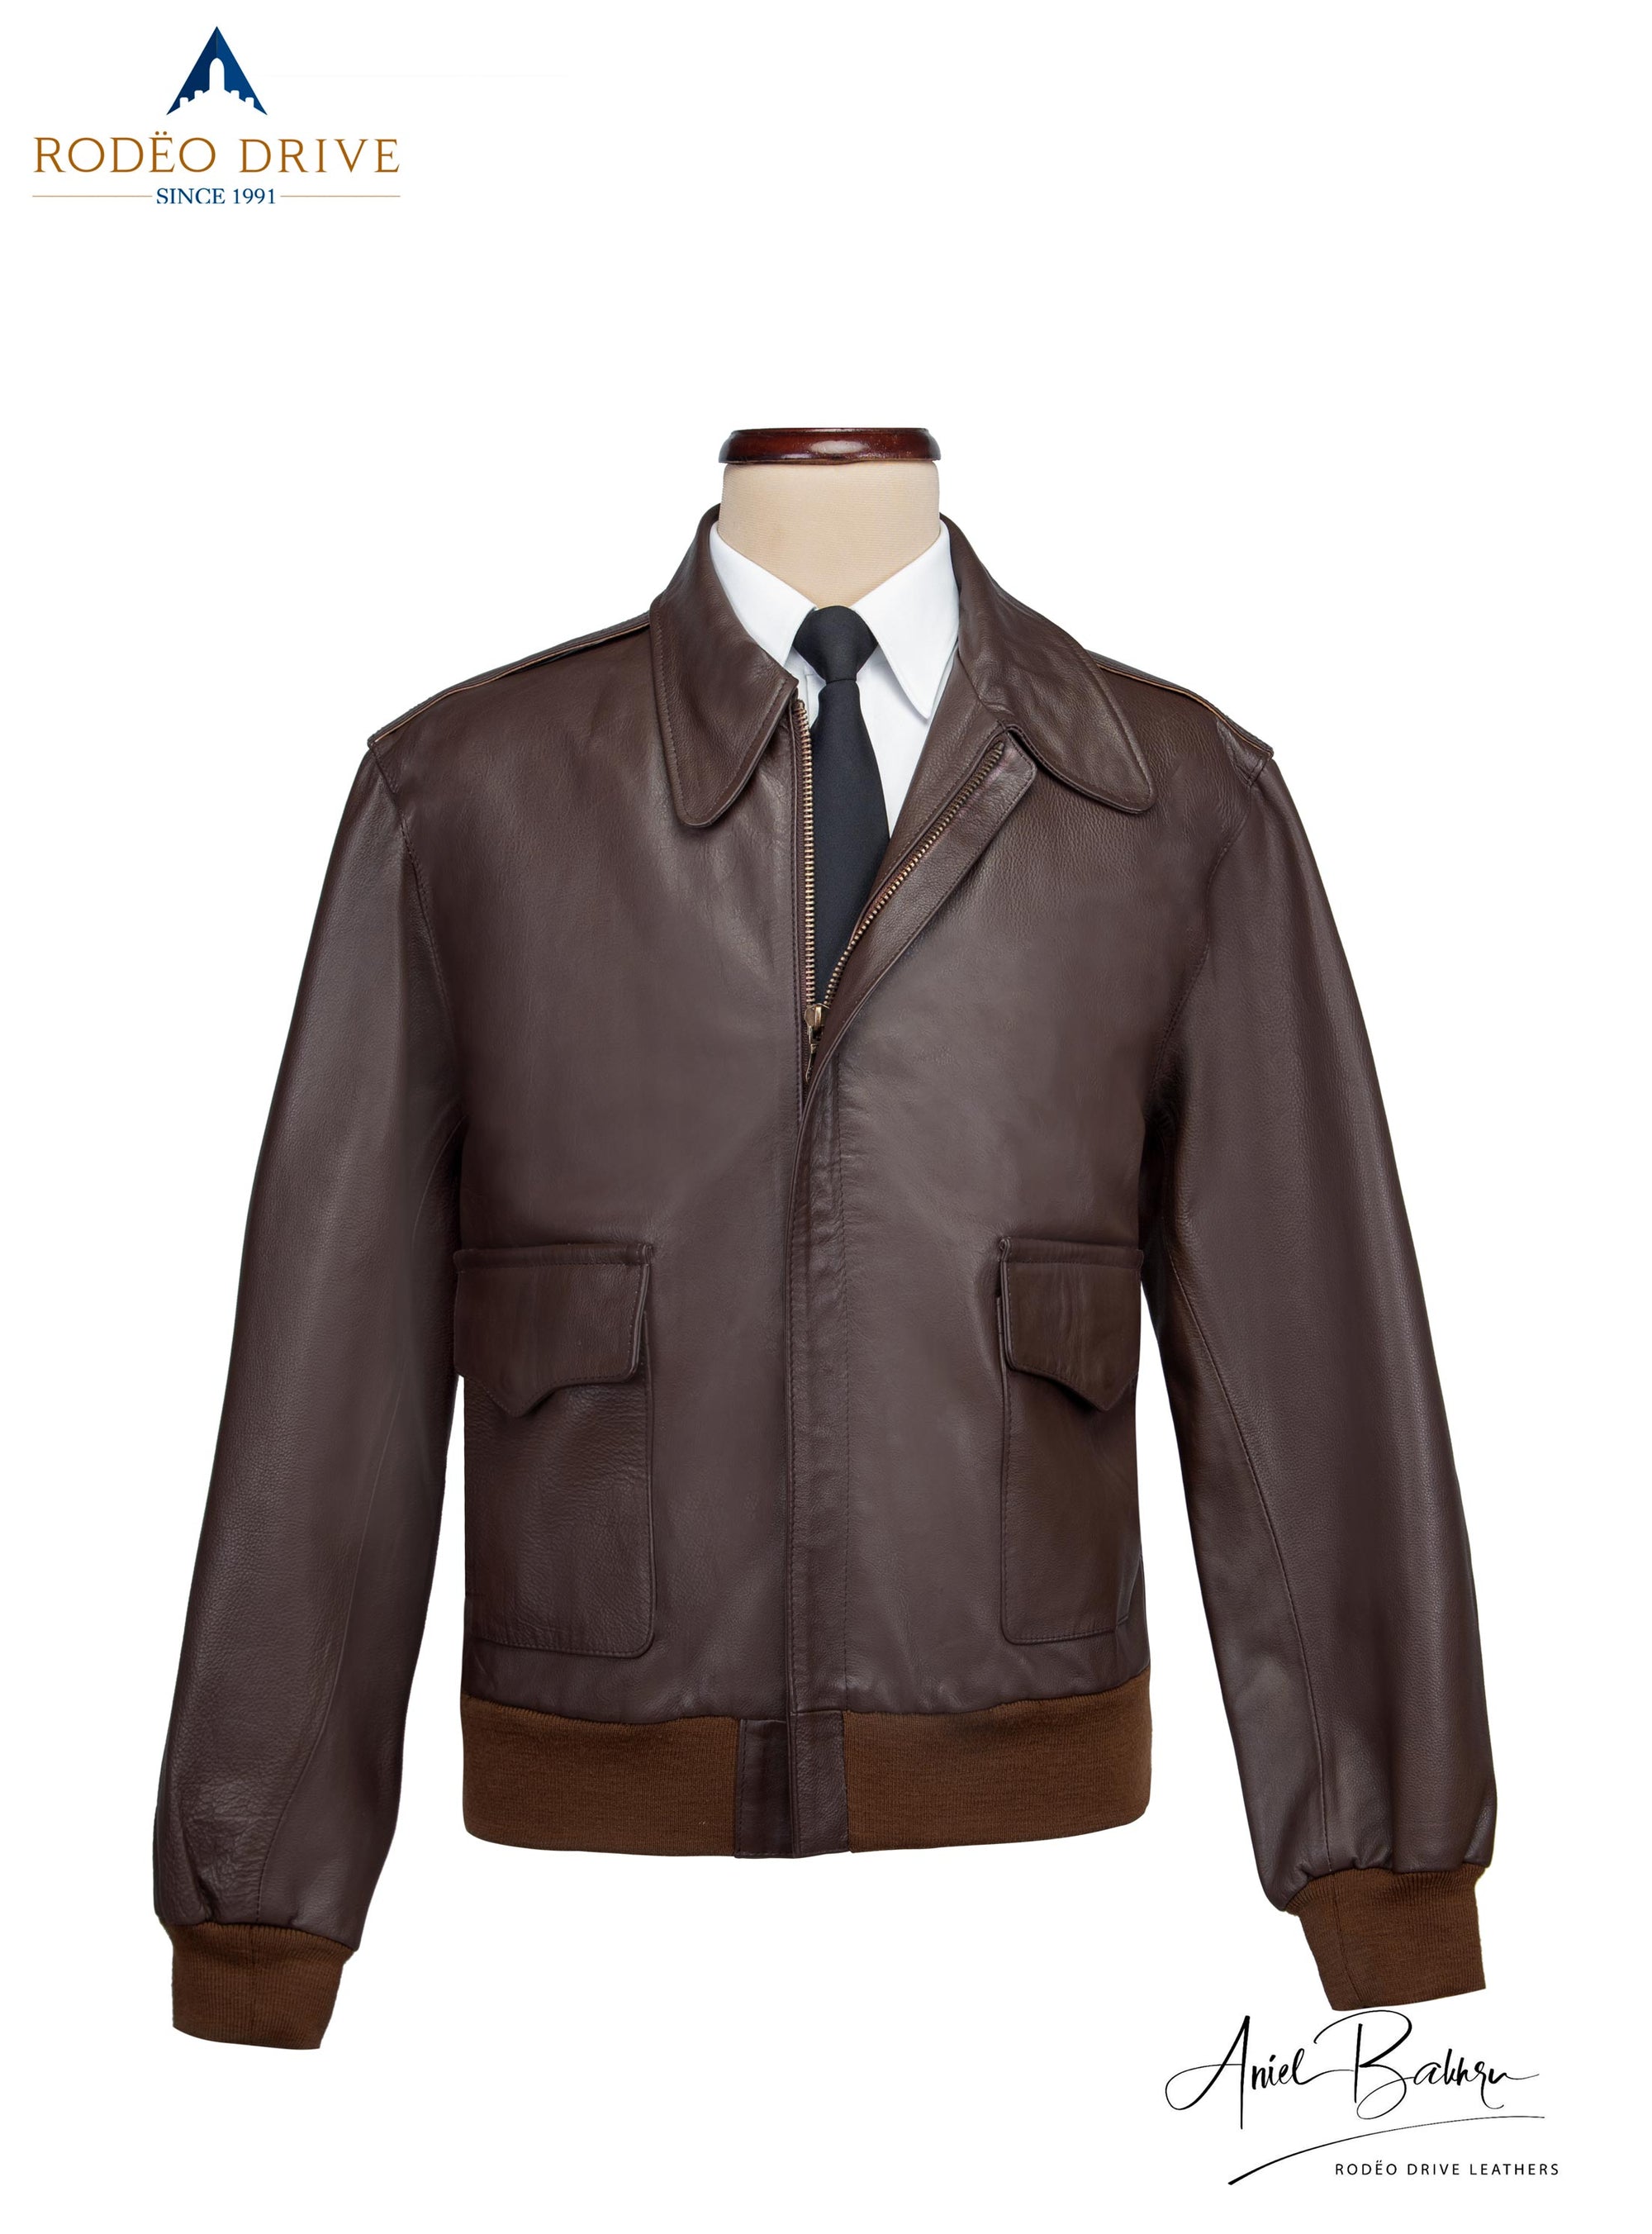  image of stylish AIRFORCE BOMBER JACKET. A white shirt is tucked inside with a neck tie.